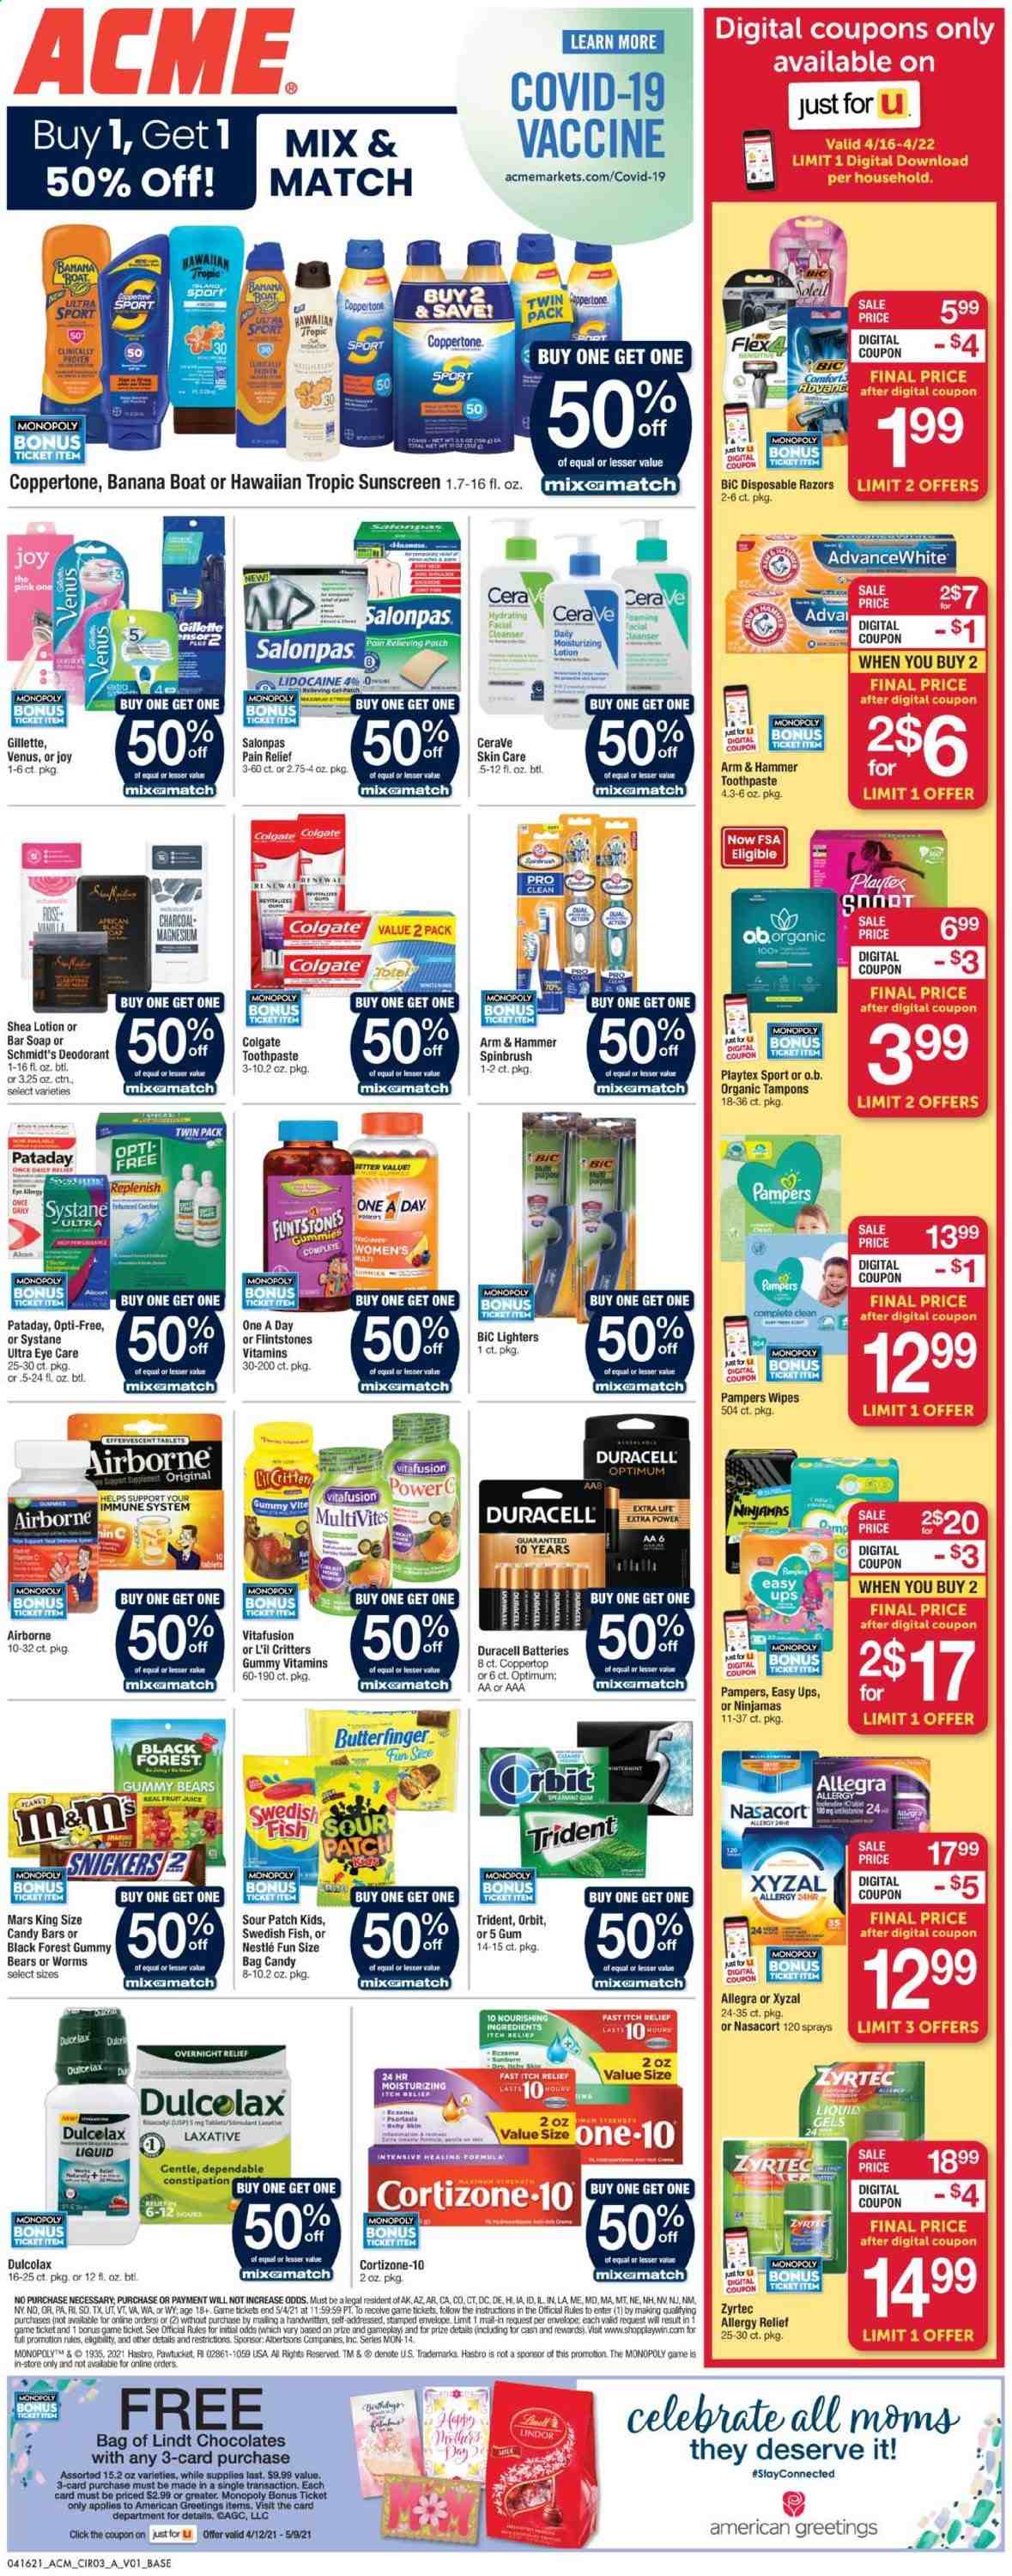 thumbnail - ACME Flyer - 04/16/2021 - 04/22/2021 - Sales products - Nestlé, chocolate, Orbit, Lindt, Lindor, Snickers, Mars, Trident, Sour Patch, ARM & HAMMER, oats, juice, rosé wine, wipes, Pampers, Joy, soap bar, soap, Colgate, toothpaste, Playtex, tampons, CeraVe, cleanser, body lotion, anti-perspirant, deodorant, BIC, Gillette, Venus, disposable razor, envelope, battery, Duracell, Optimum, pain relief, Dulcolax, magnesium, Systane, Vitafusion, Zyrtec, laxative, allergy relief. Page 4.